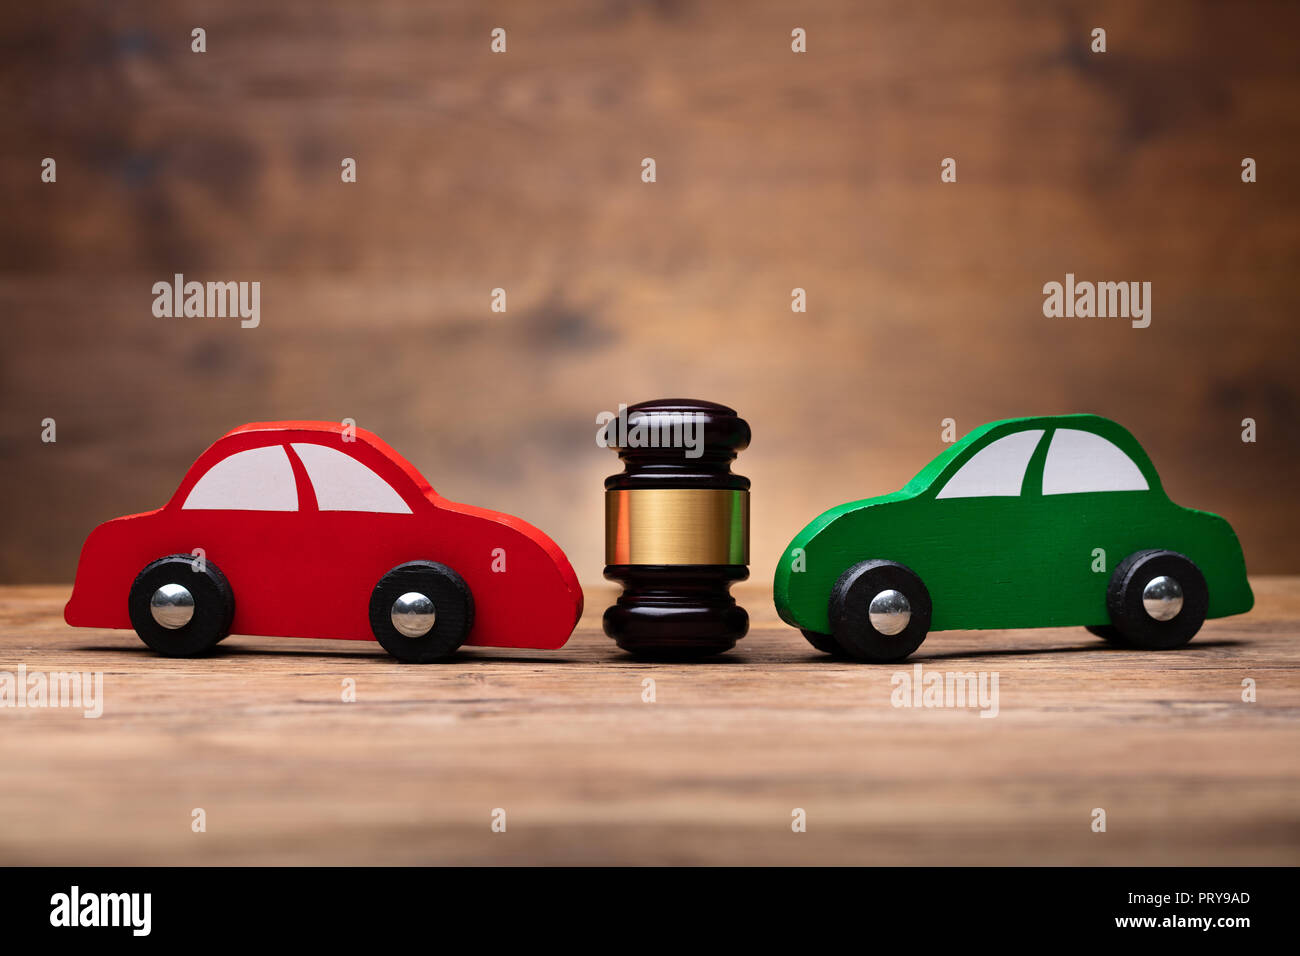 Wooden Mallet Between Two Red And Green Car On Wooden Surface Stock Photo